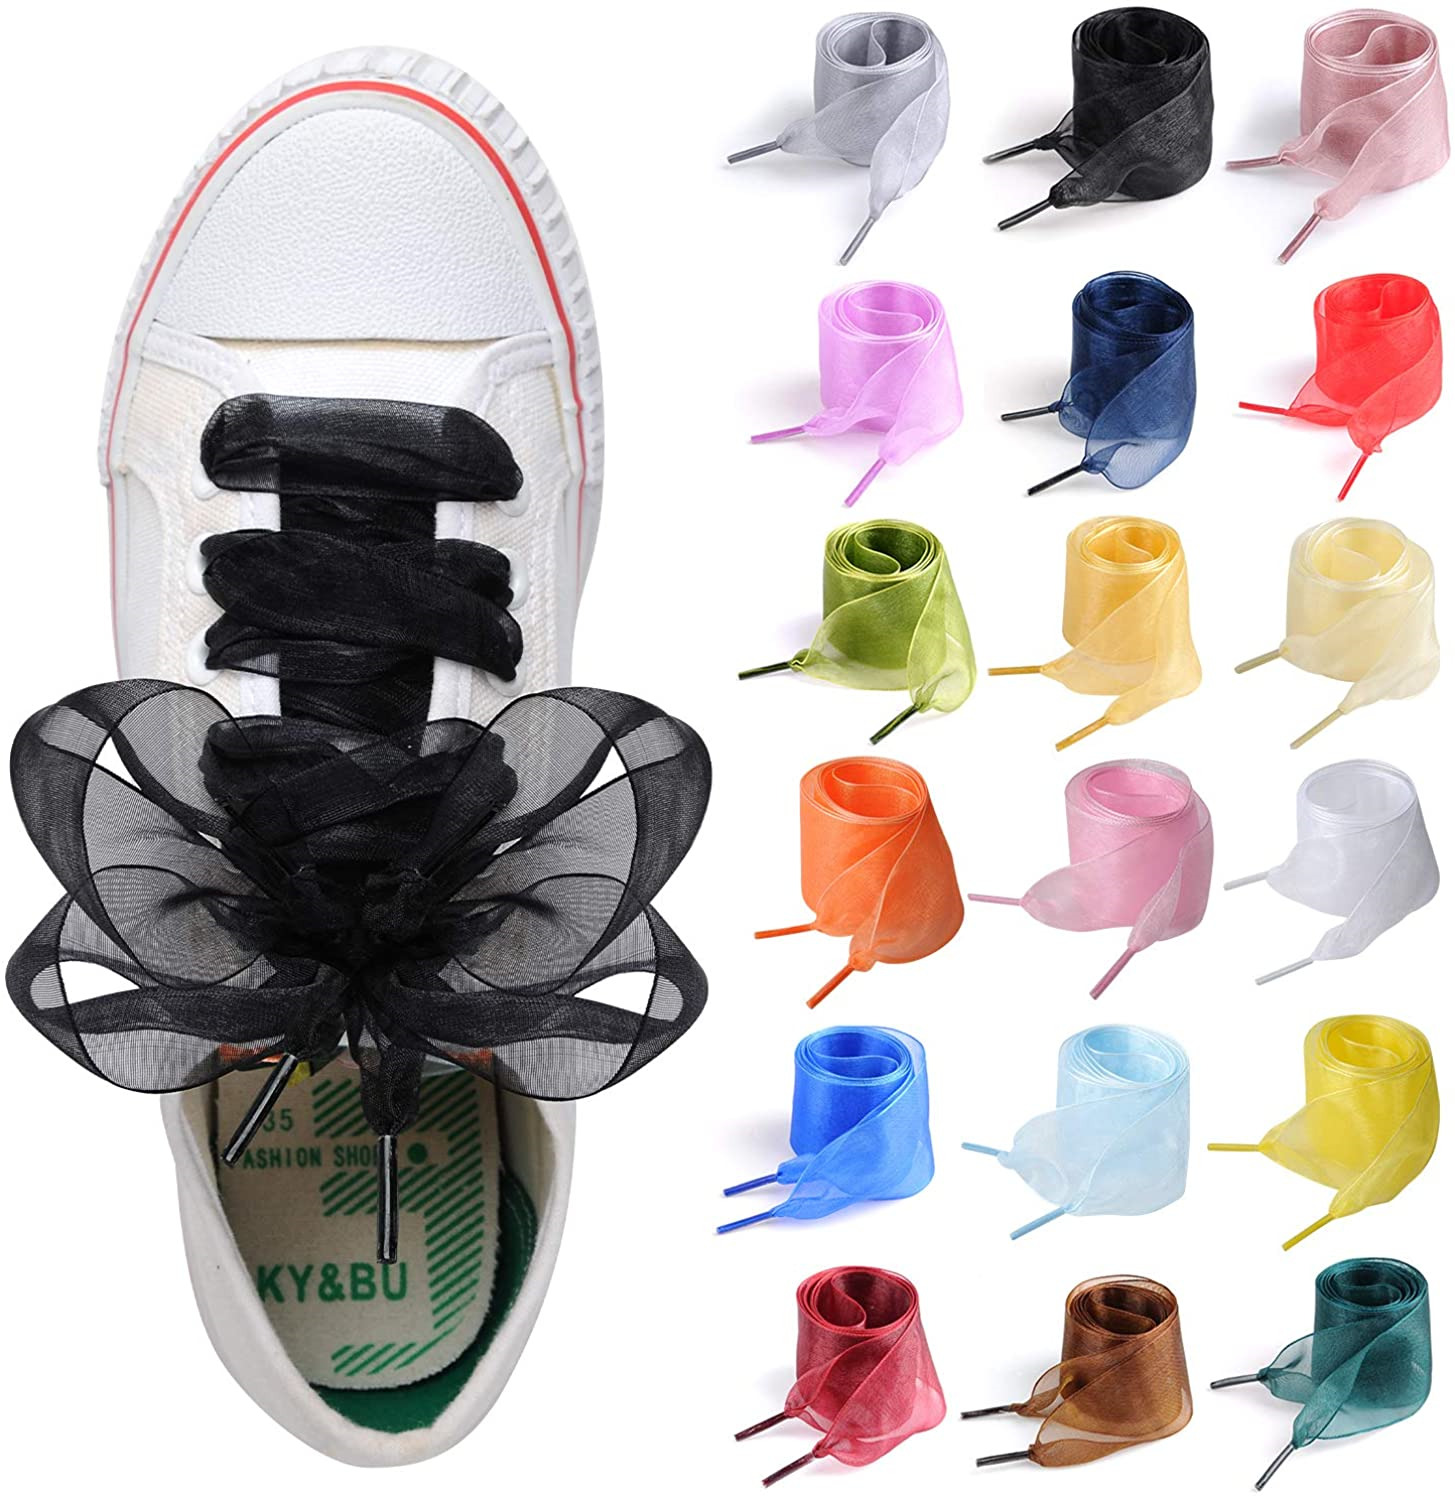 Shoe Laces for Sneakers, 18 Pairs Flat Satin Ribbon Shoelaces for Women Girls 18